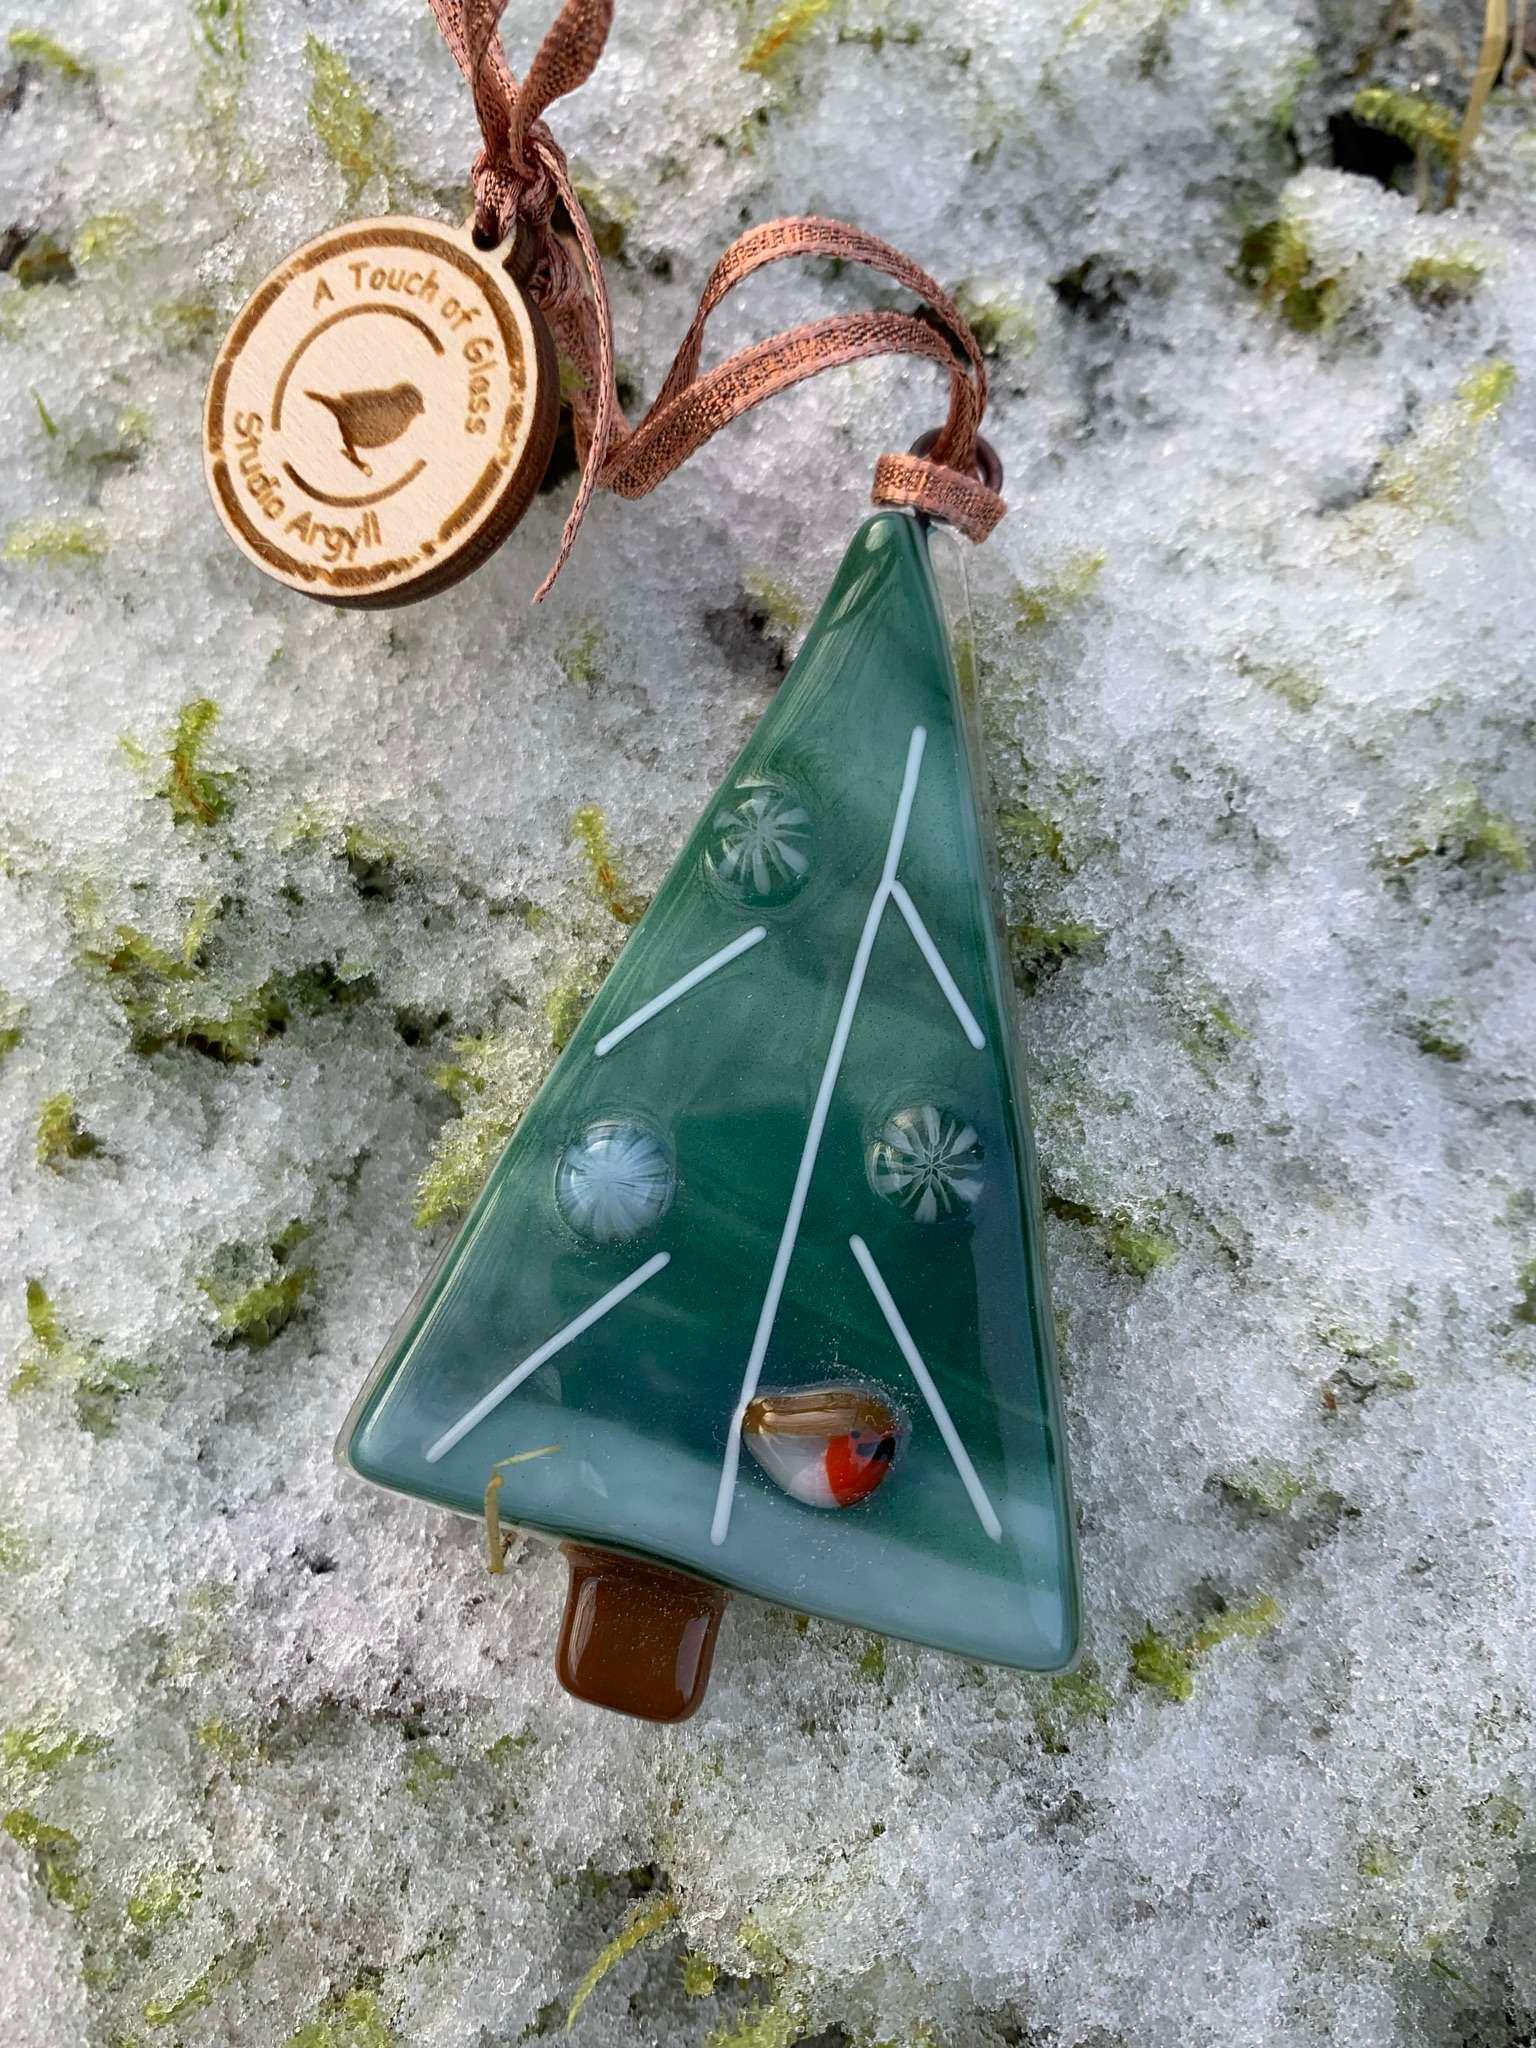 Product Fused Glass Christmas Tree with Robin Decoration - A Touch of Glass Studio image